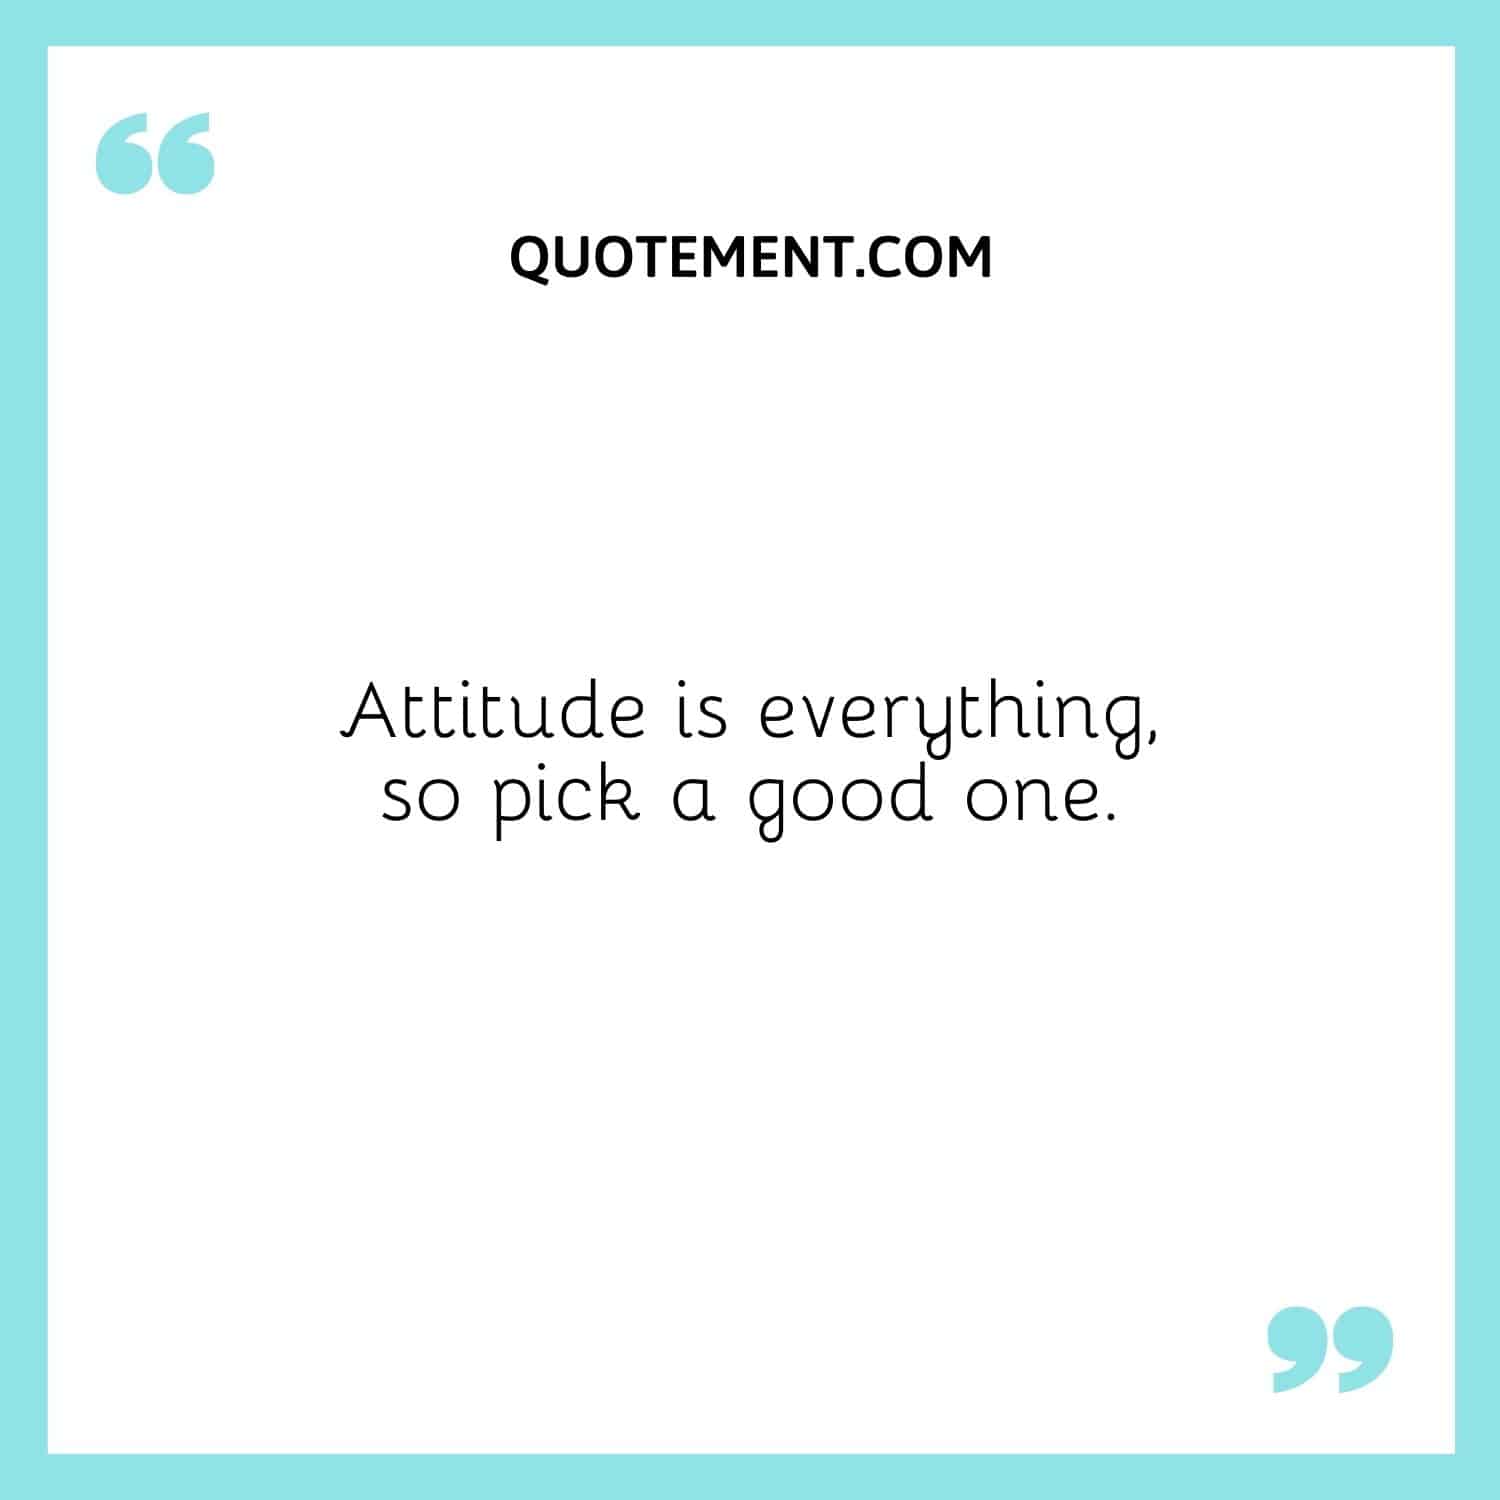 Attitude is everything, so pick a good one.